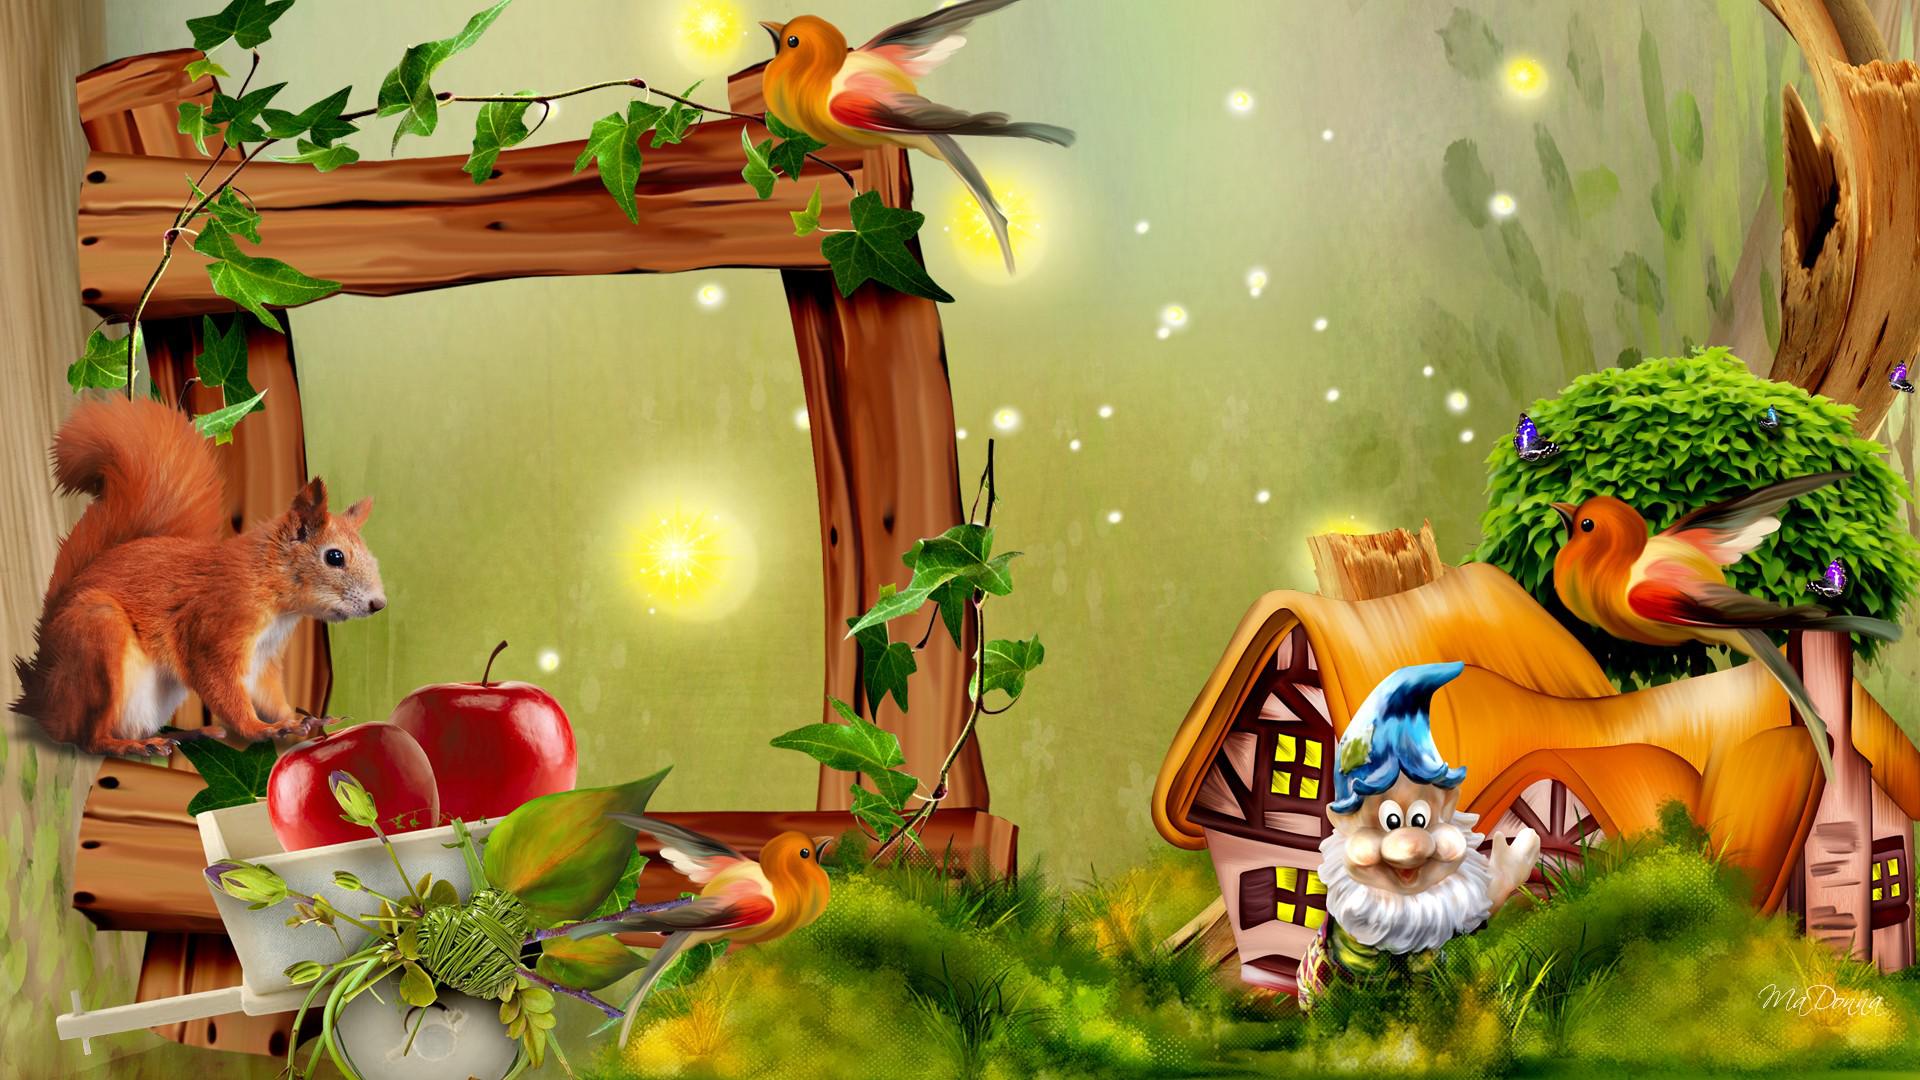 Free download Gnome village 134567 High Quality and Resolution Wallpaper on [1920x1080] for your Desktop, Mobile & Tablet. Explore Garden Gnome Wallpaper. Gnome Wallpaper, Gnome Wallpaper for